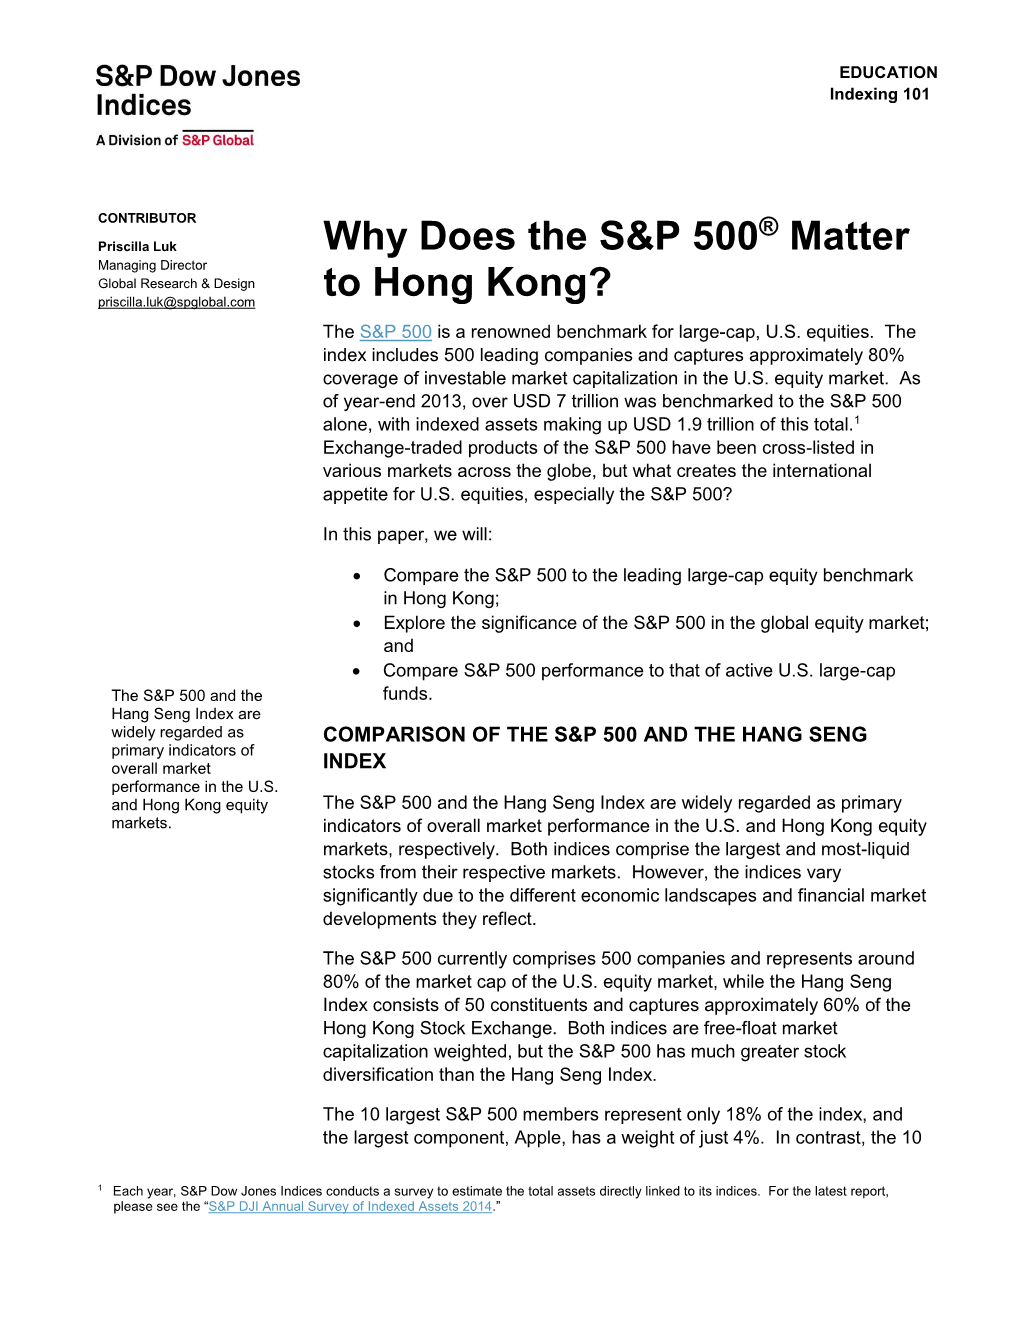 Why Does the S&P 500® Matter to Hong Kong?